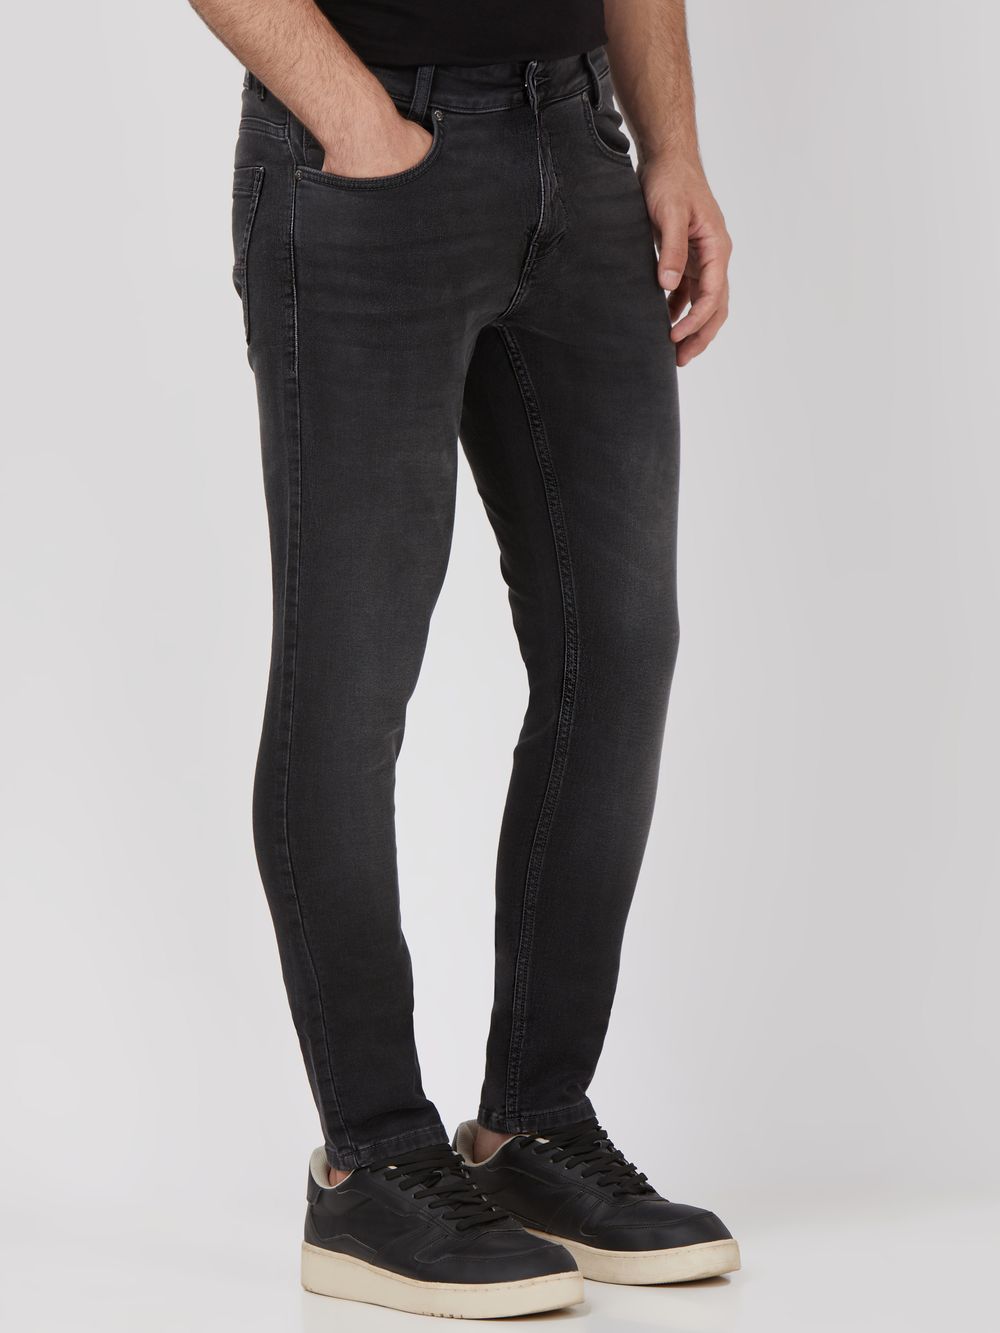 Charcoal Skinny Fit Denim Deluxe Stretch Jeans